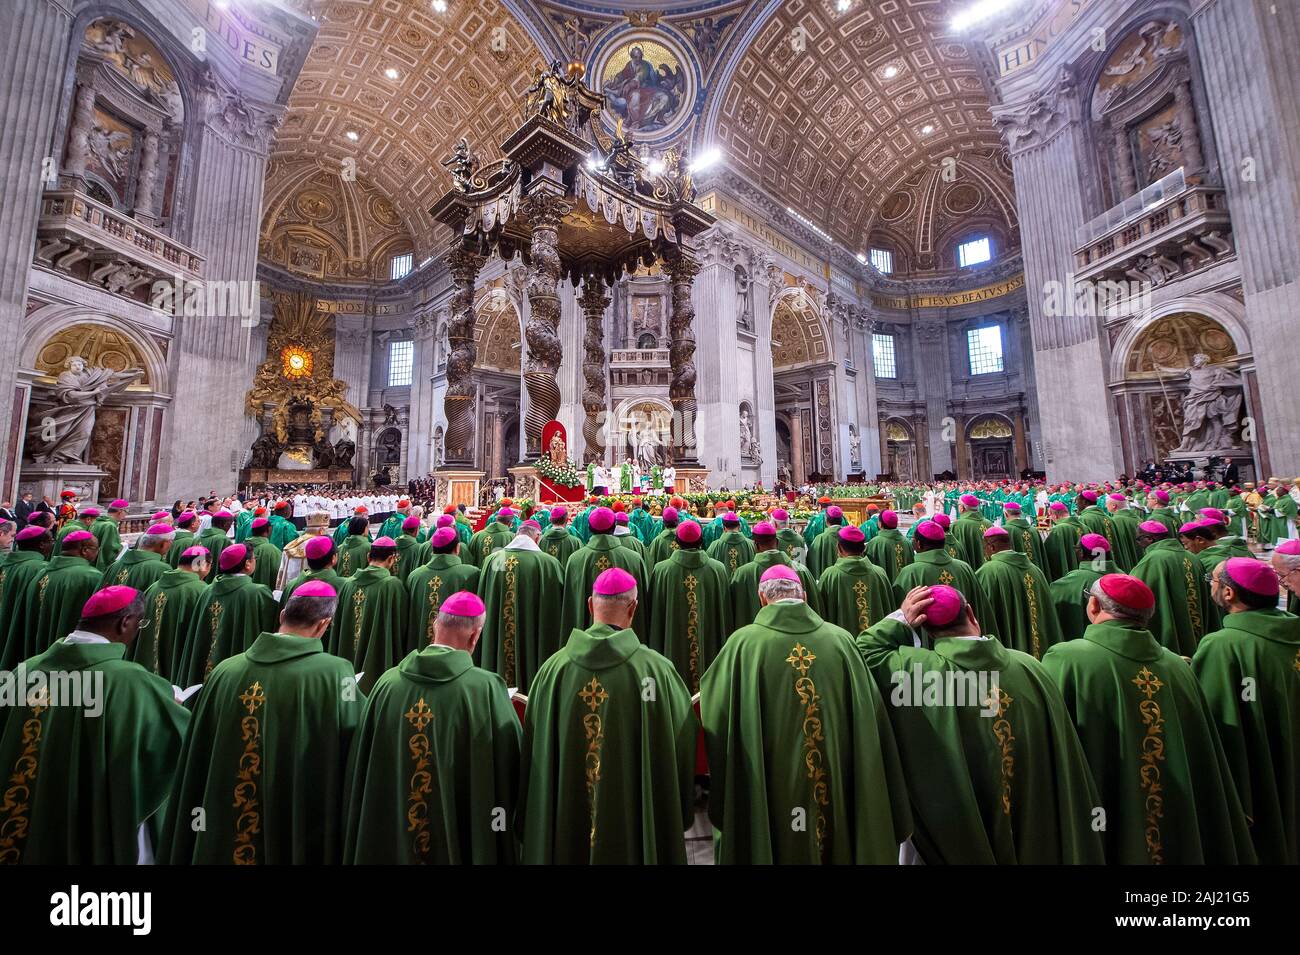 Pope Francis celebrates a closing Mass at the end of the Synod of Bishops in St. Peter's Basilica at the Vatican, Rome, Lazio, Italy, Europe Stock Photo